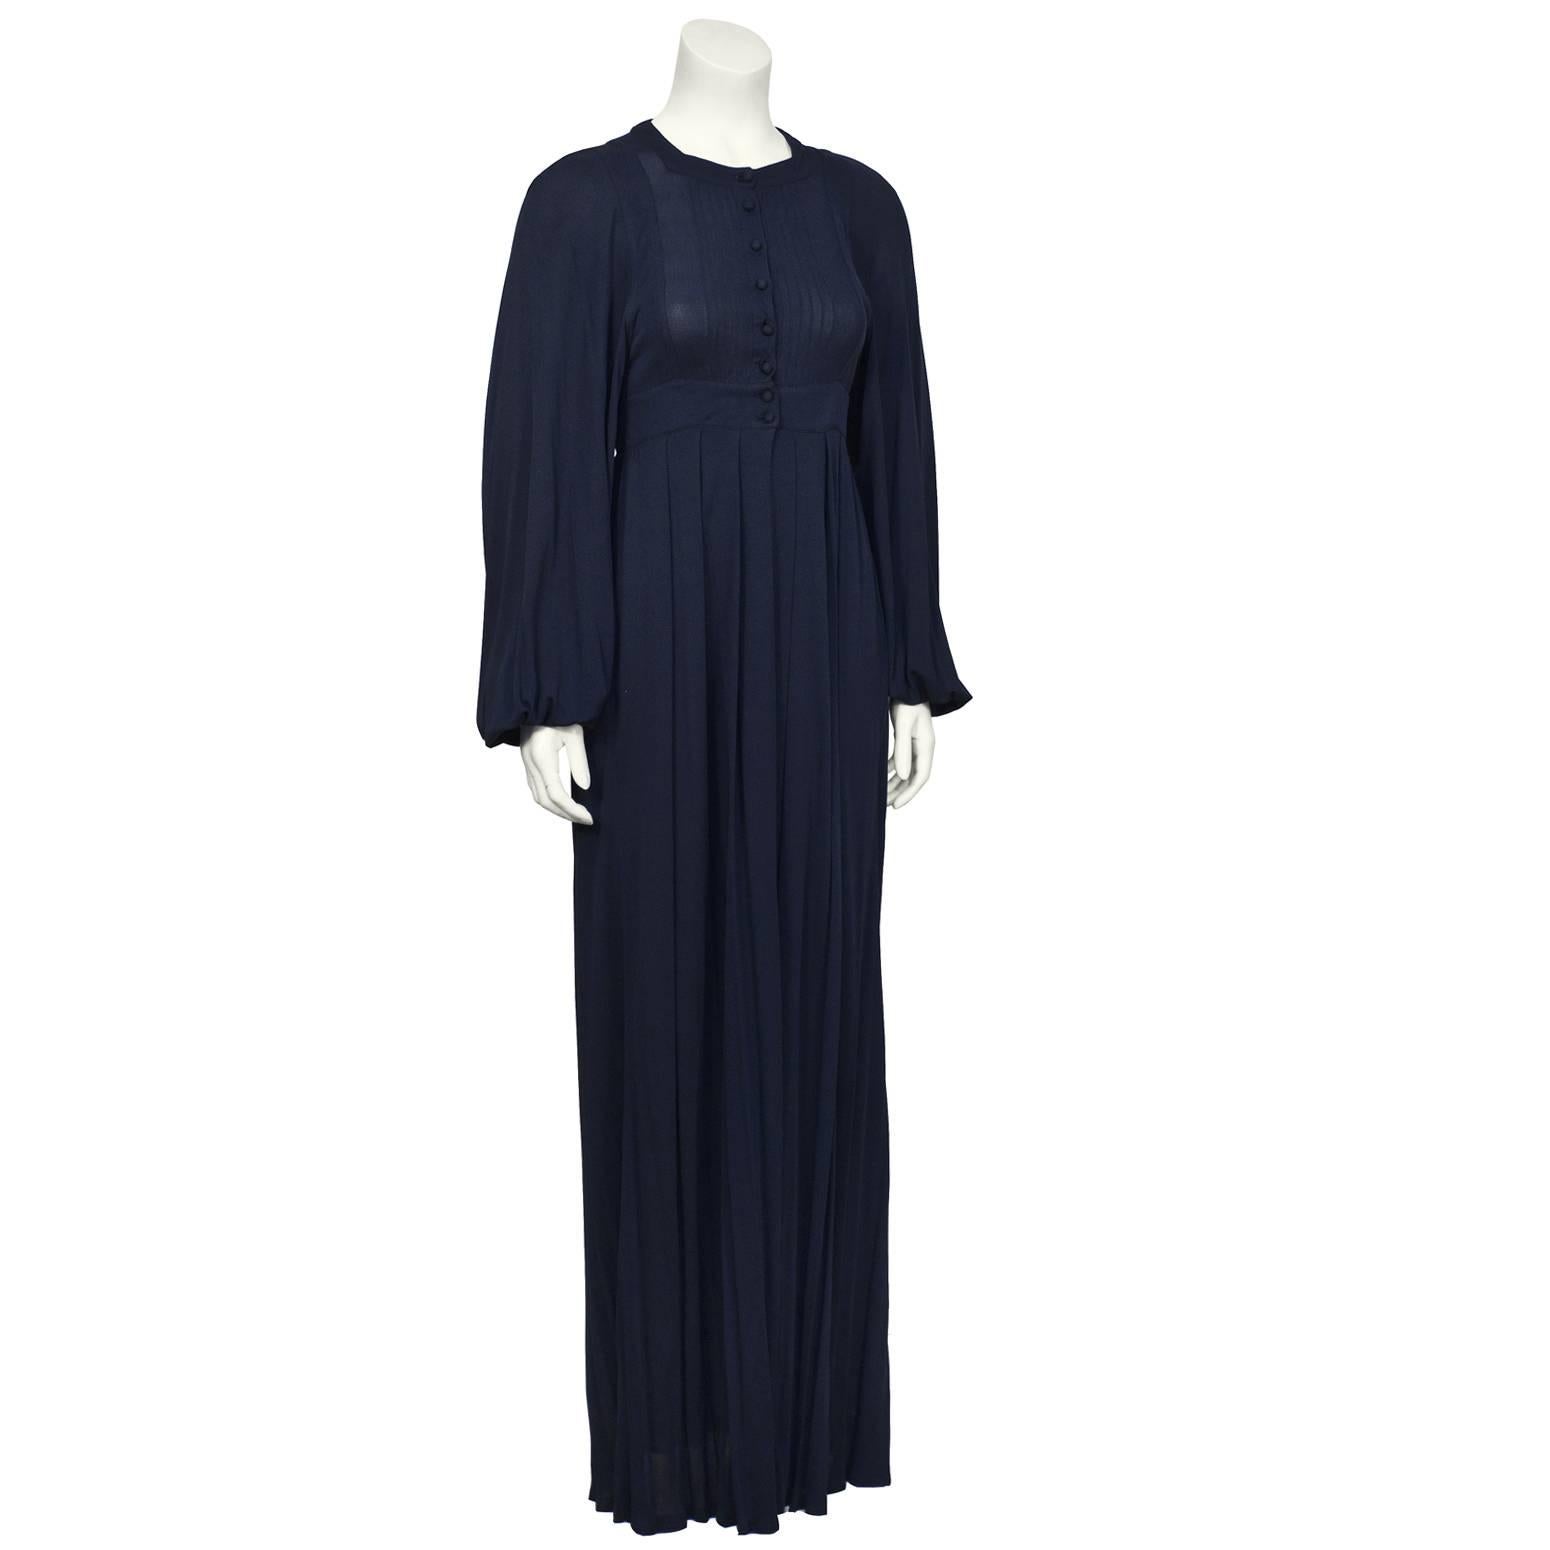 Jean Muir navy rayon jersey long sleeve maxi dress from the 1970’s. Round neckline buttons down the front with a pin tucked bib detail. The banded waist gives the dress definition and the fluid skirt falls to the ground. The sleeves are full and